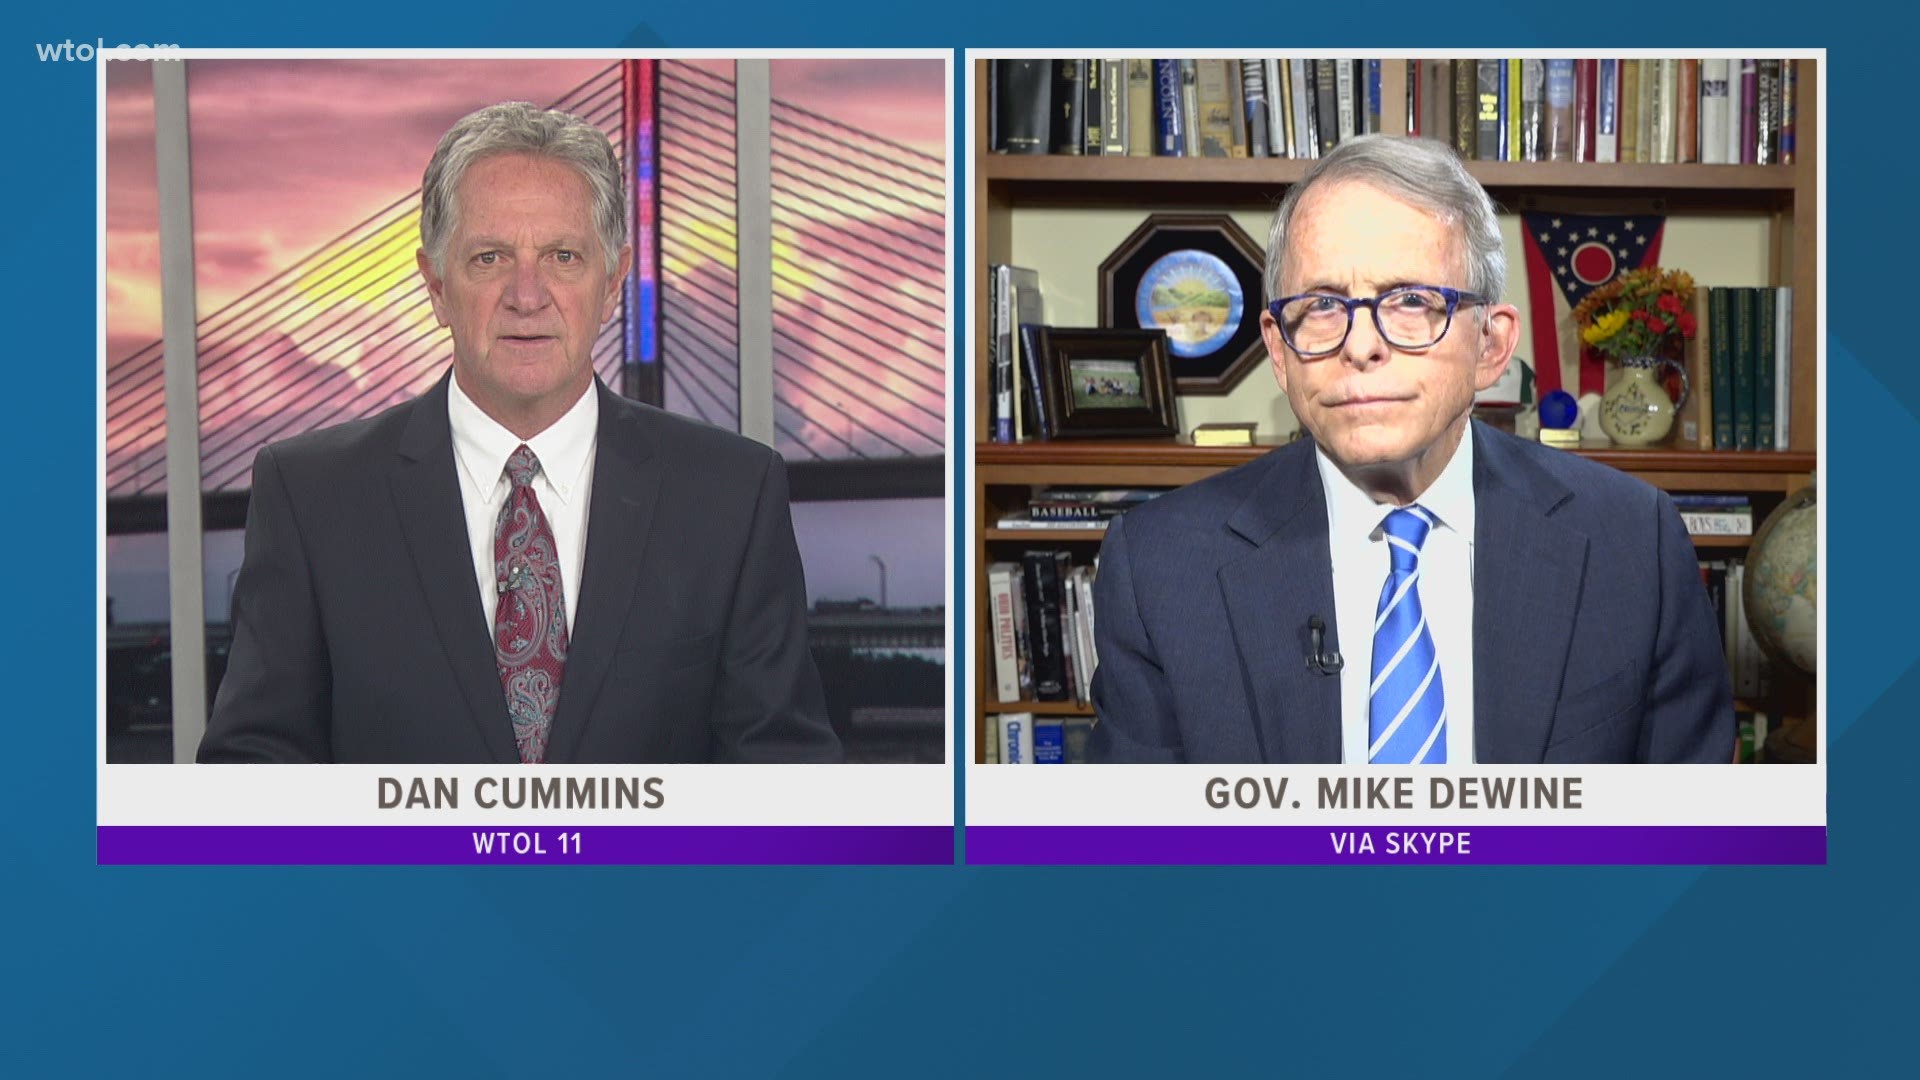 Gov. Mike DeWine joins WTOL 11 for a live interview to discuss top questions in the state of Ohio, as COVID-19 cases continue to rise sharply.